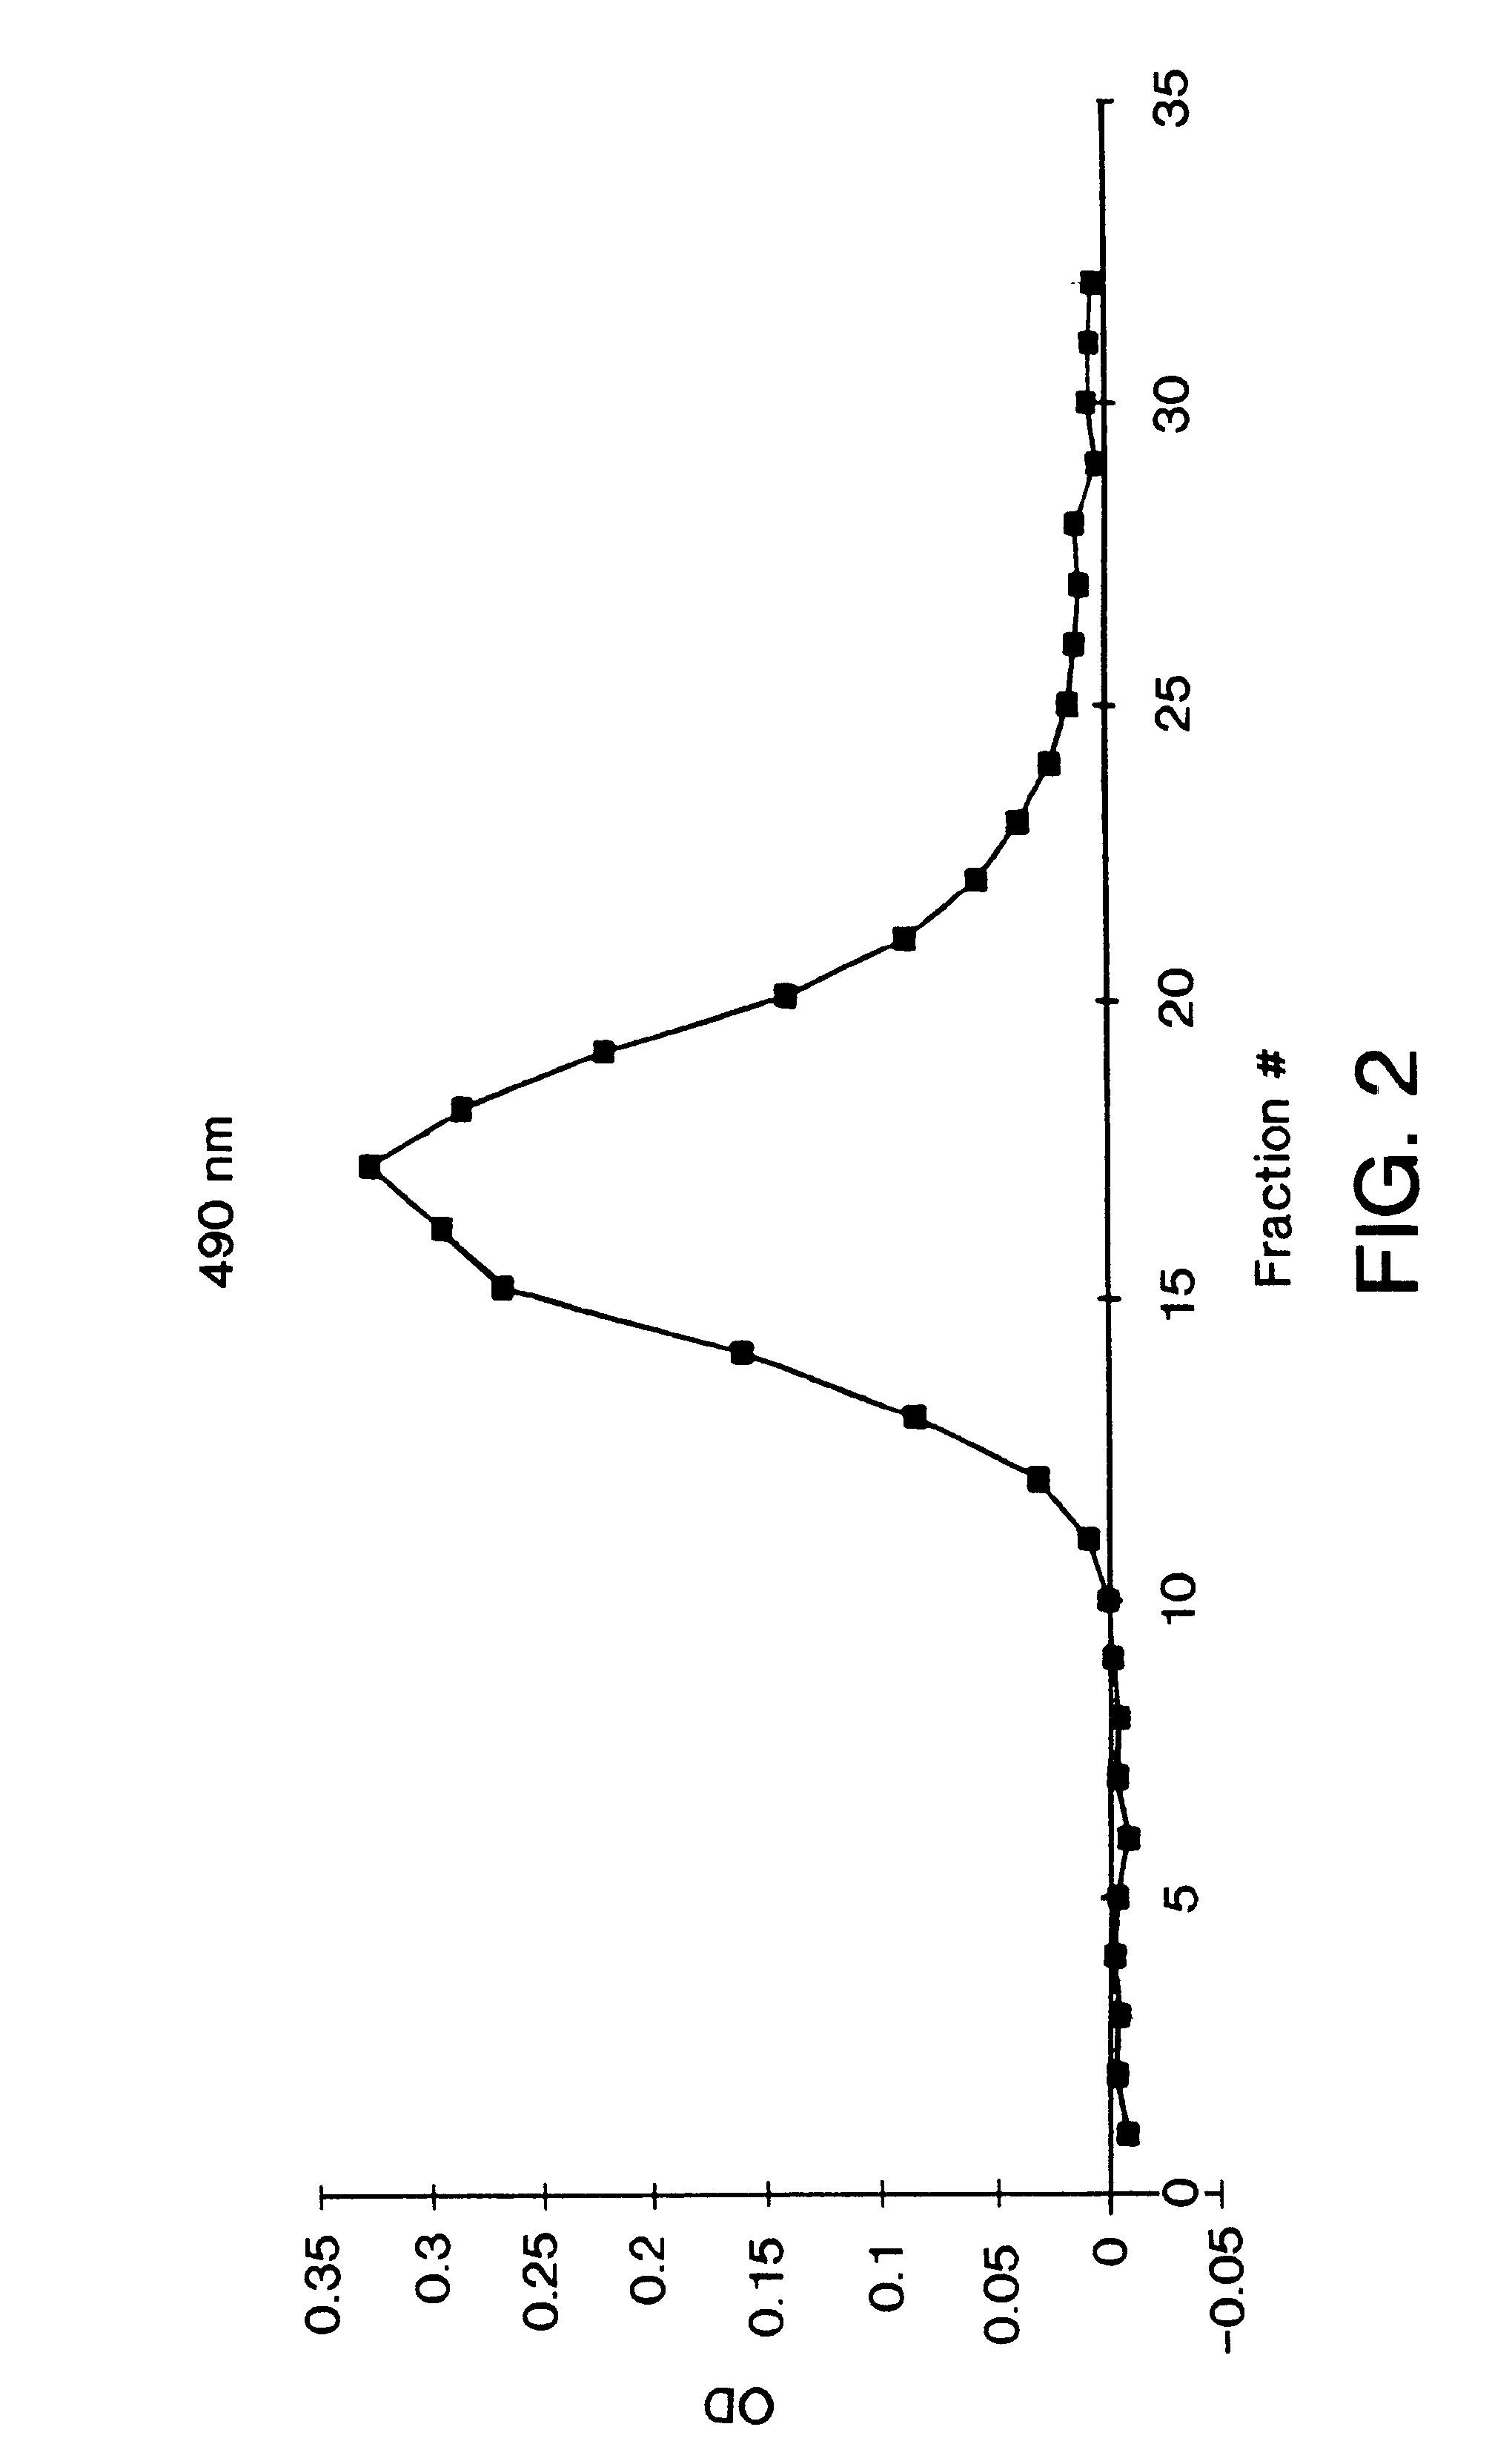 Vertical-beam photometer for determination of light absorption pathlength